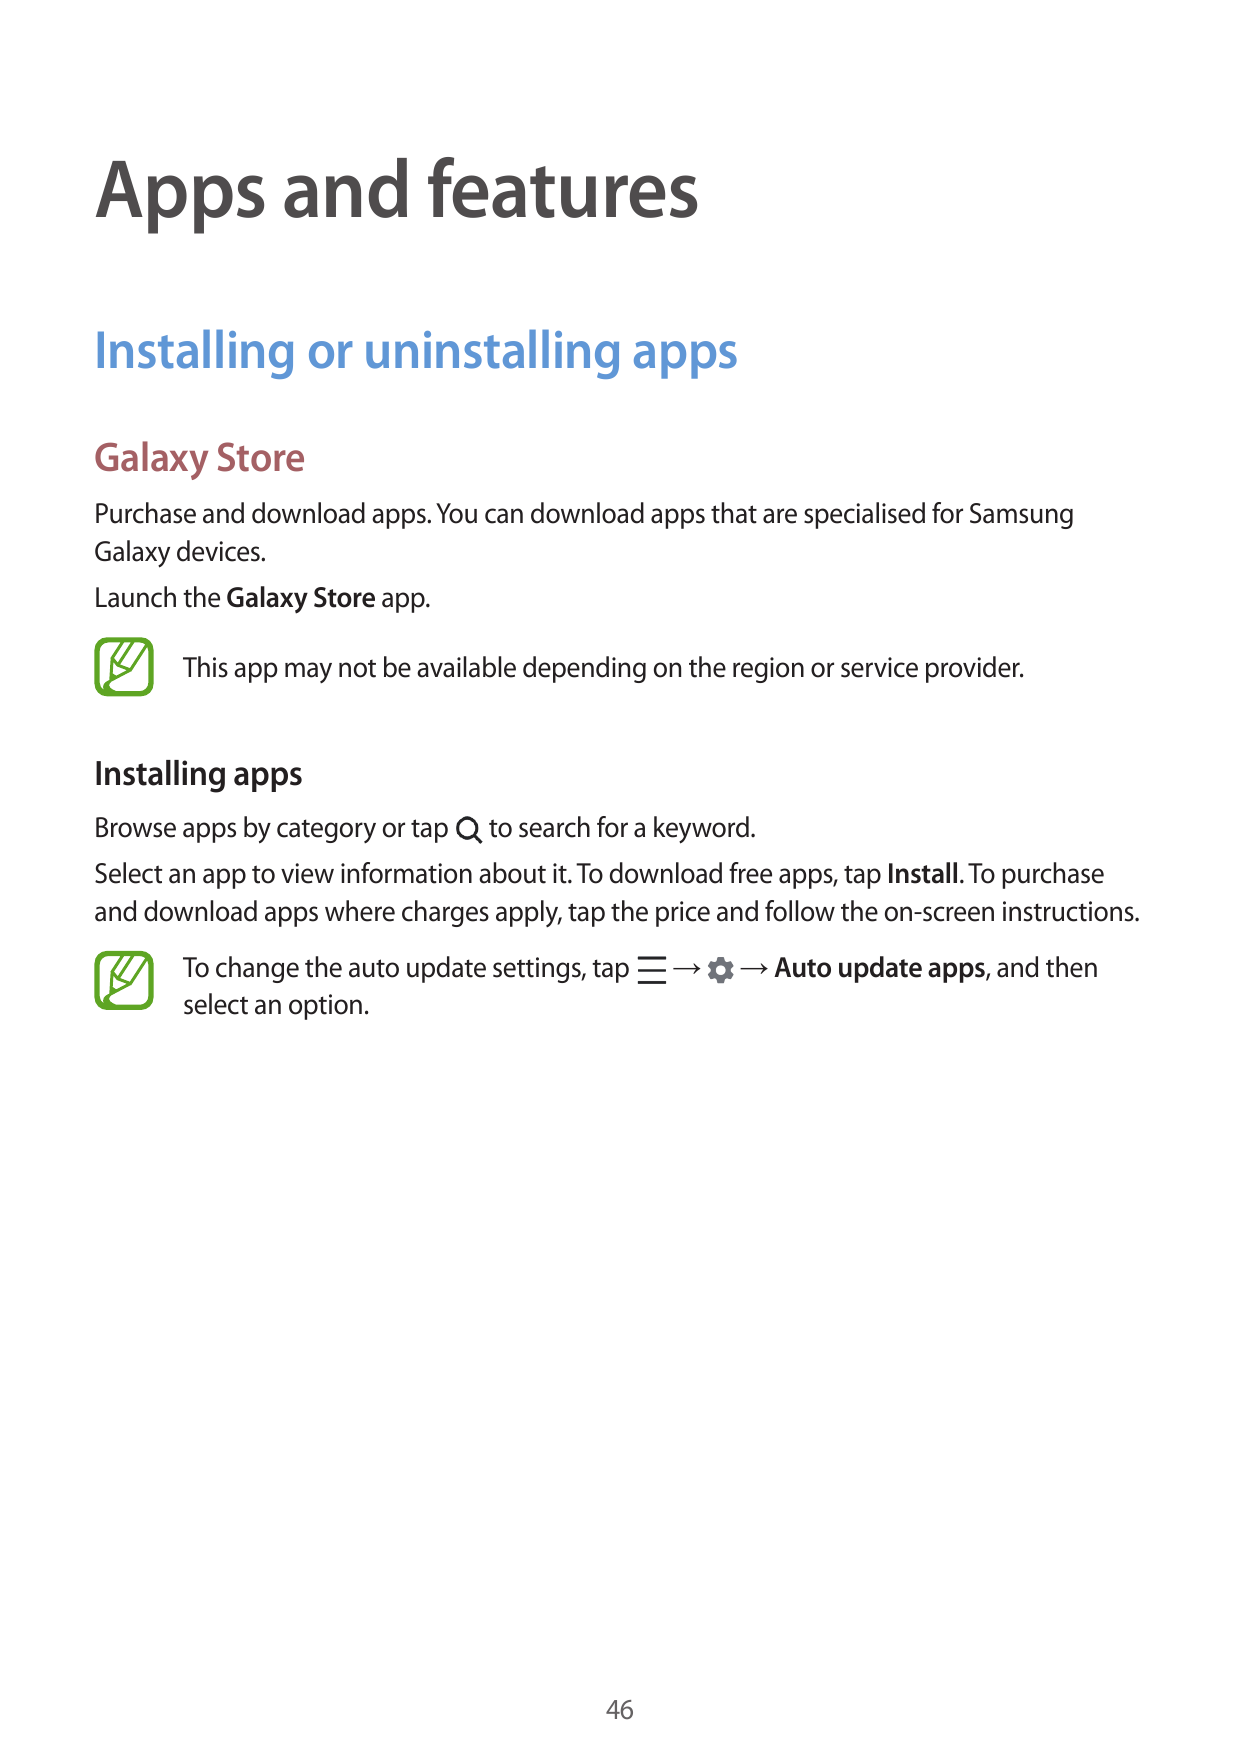 Apps and featuresInstalling or uninstalling appsGalaxy StorePurchase and download apps. You can download apps that are specialis